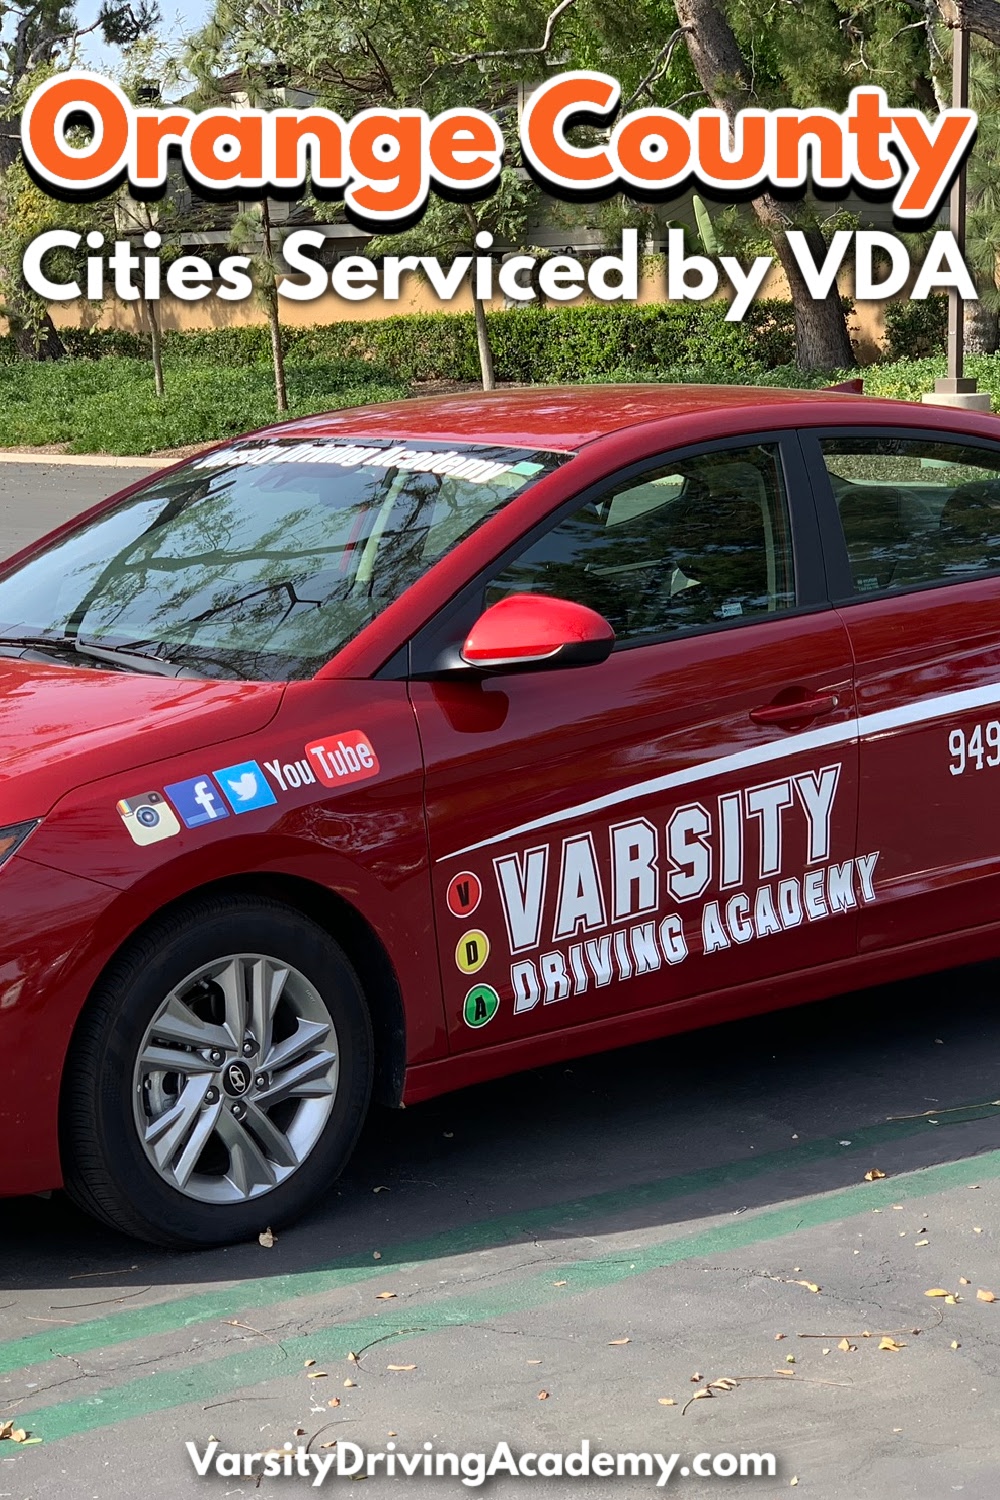 Varsity Driving Academy is proud to be the #1 rated driving school in Orange County cities for teens and adults.